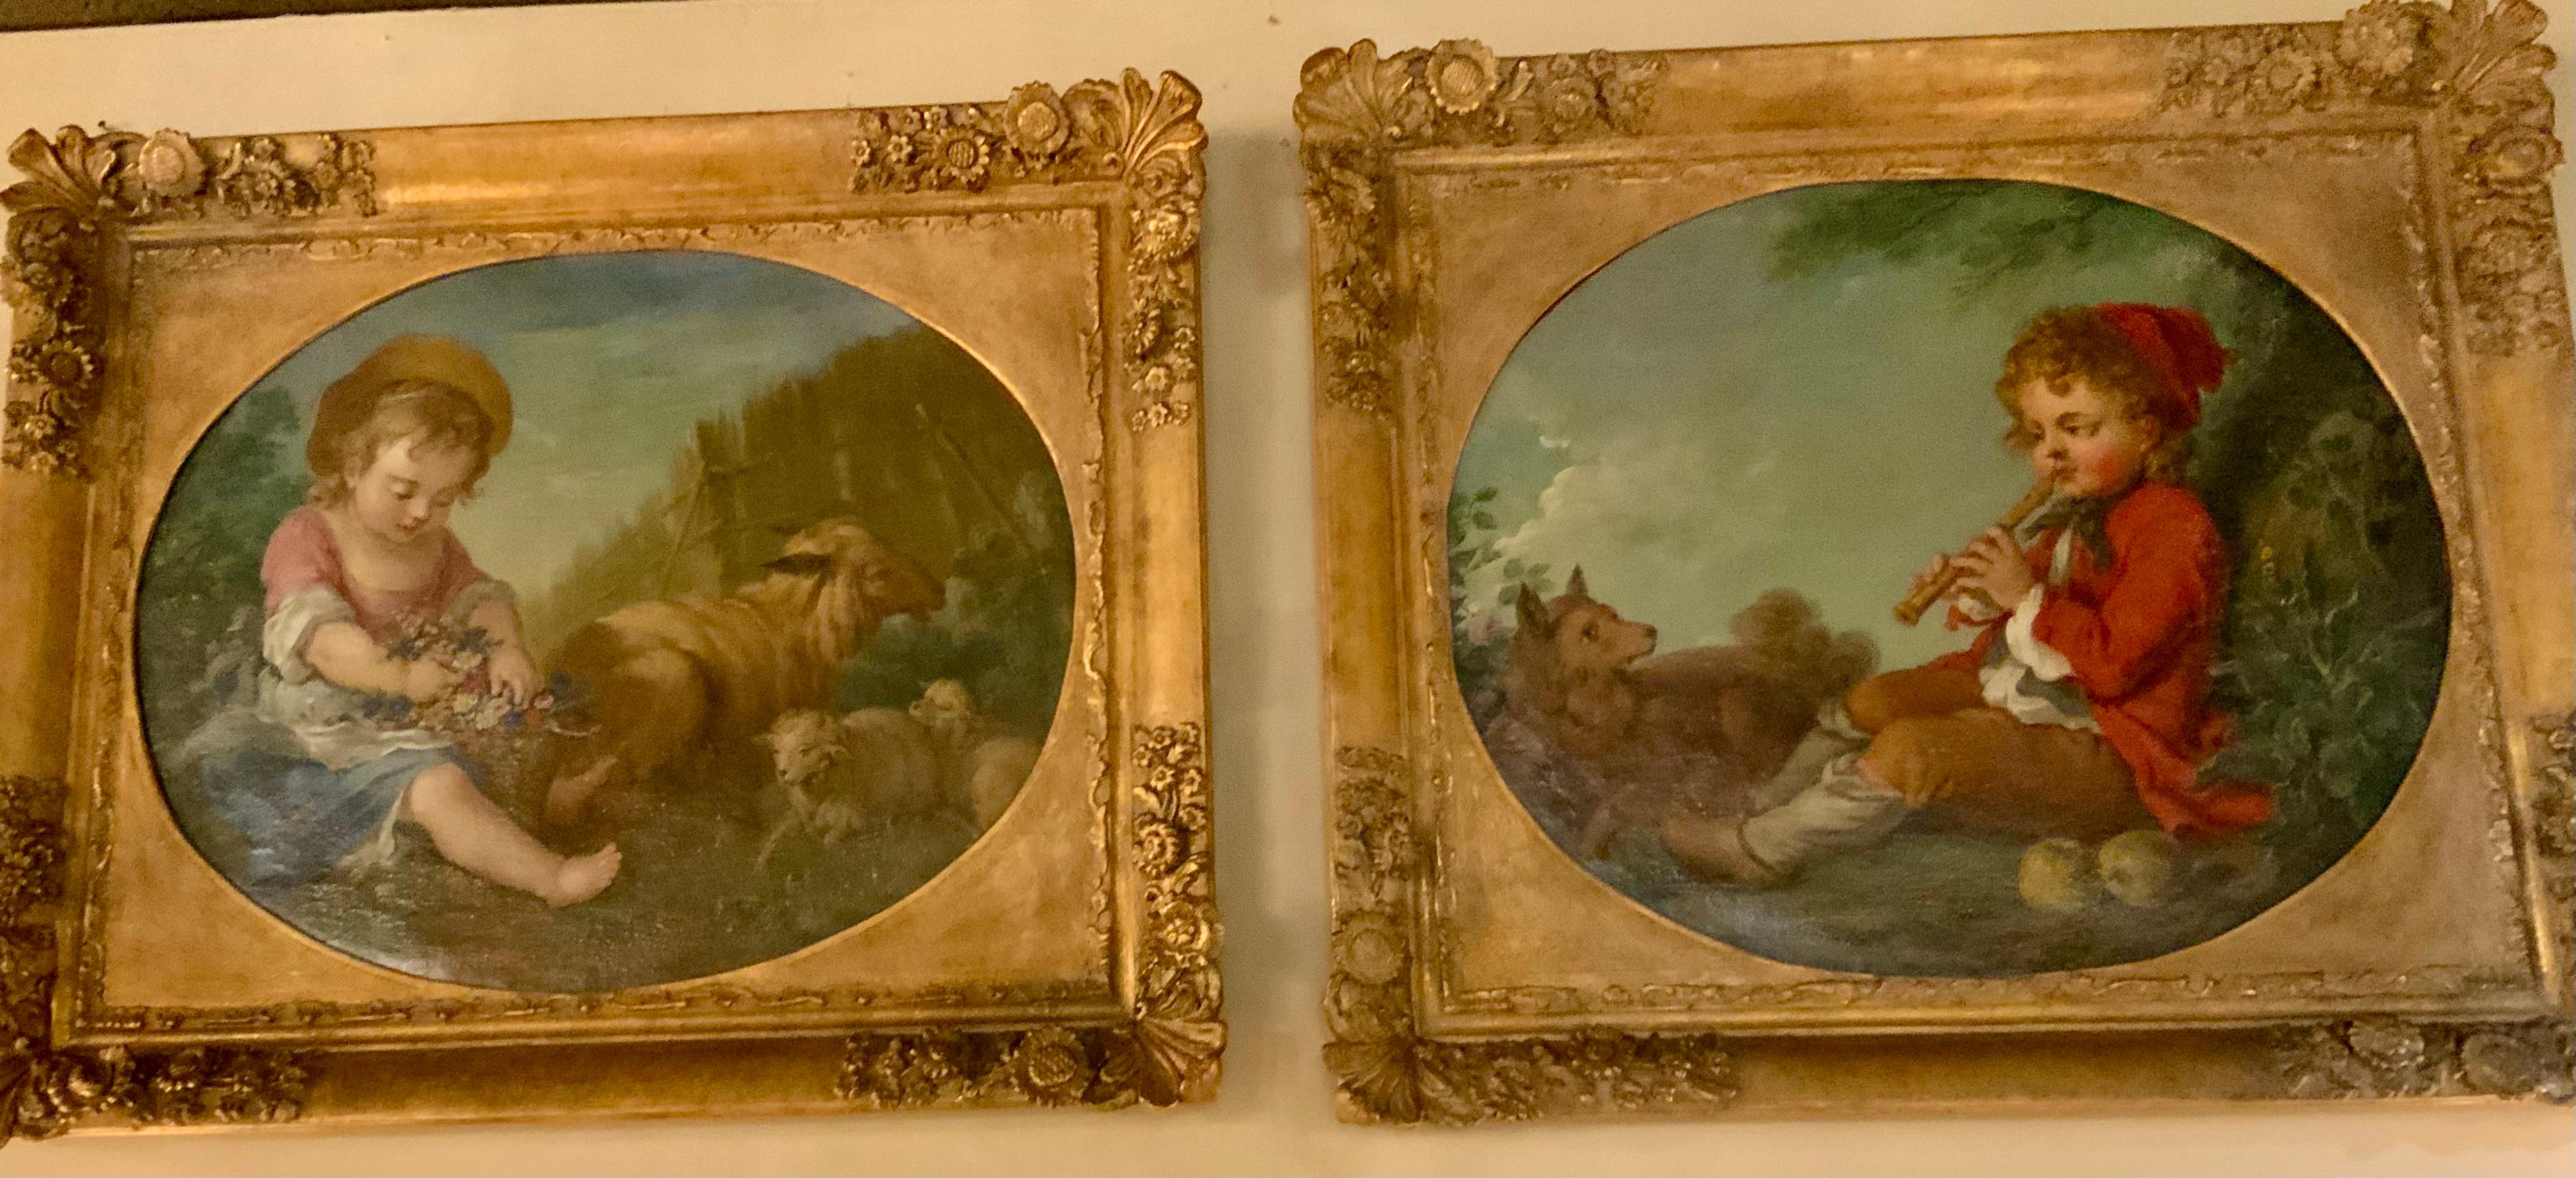 This pair has retained excellent color and the canvases are in 
Good condition without tears or restorations. They are after
The famous artist Francois Boucher who was known for his
Classical themes, allegories and pastoral scenes. He was the 
Most